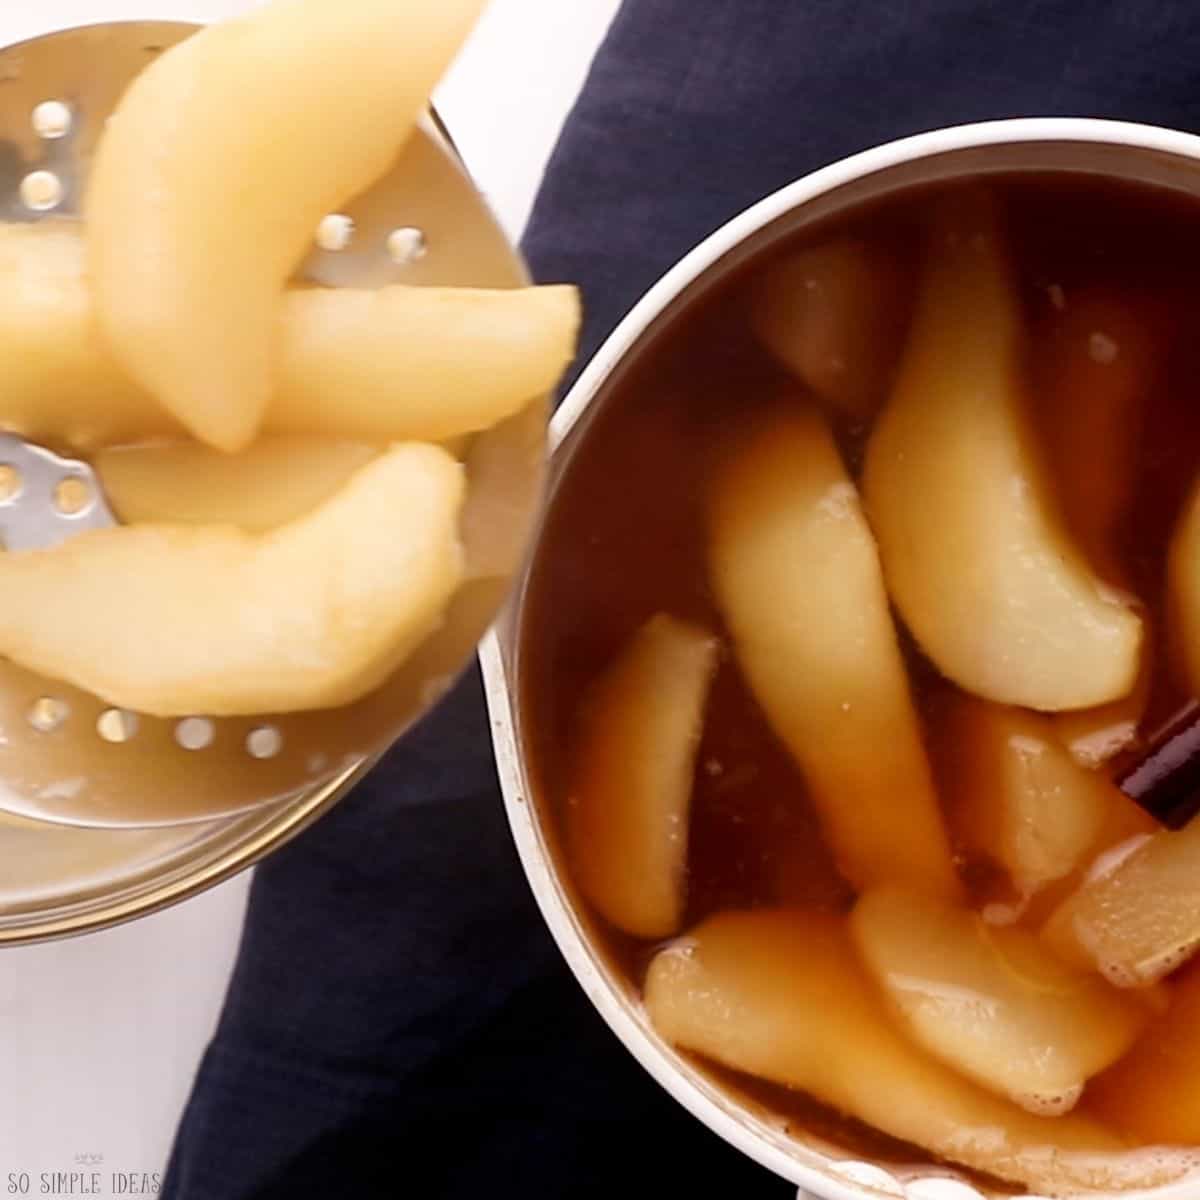 removing stewed pears with slotted spoon.